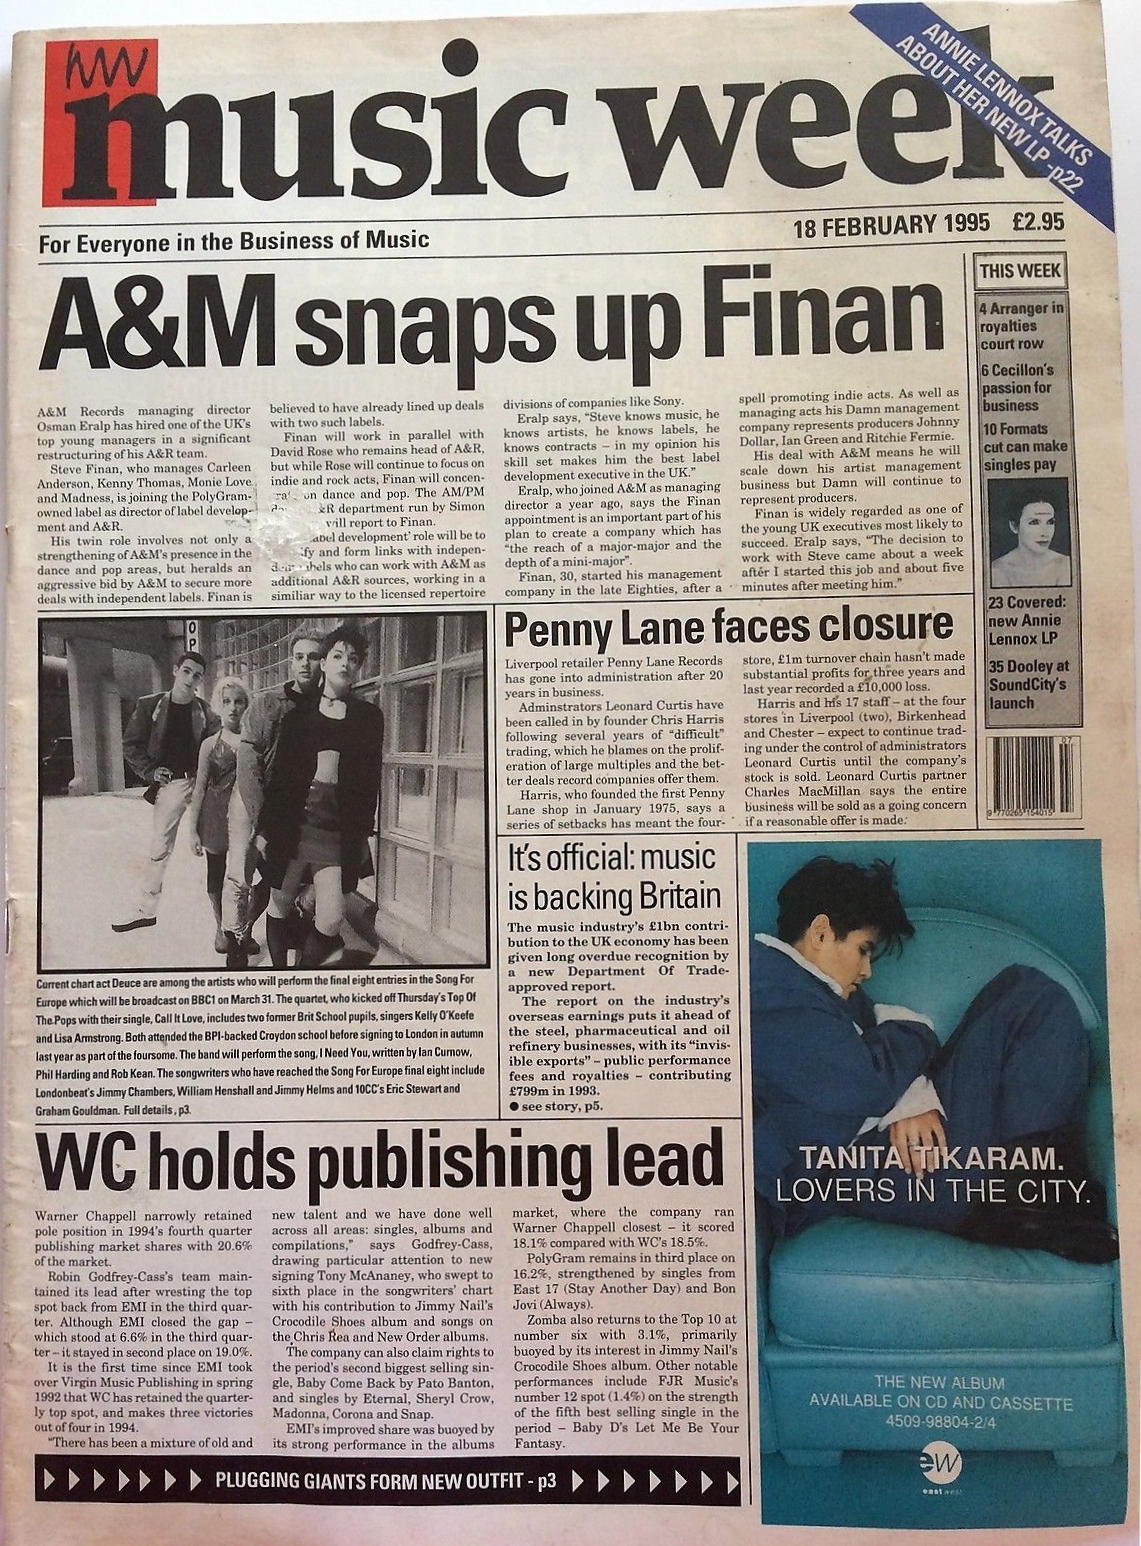 Cover with article